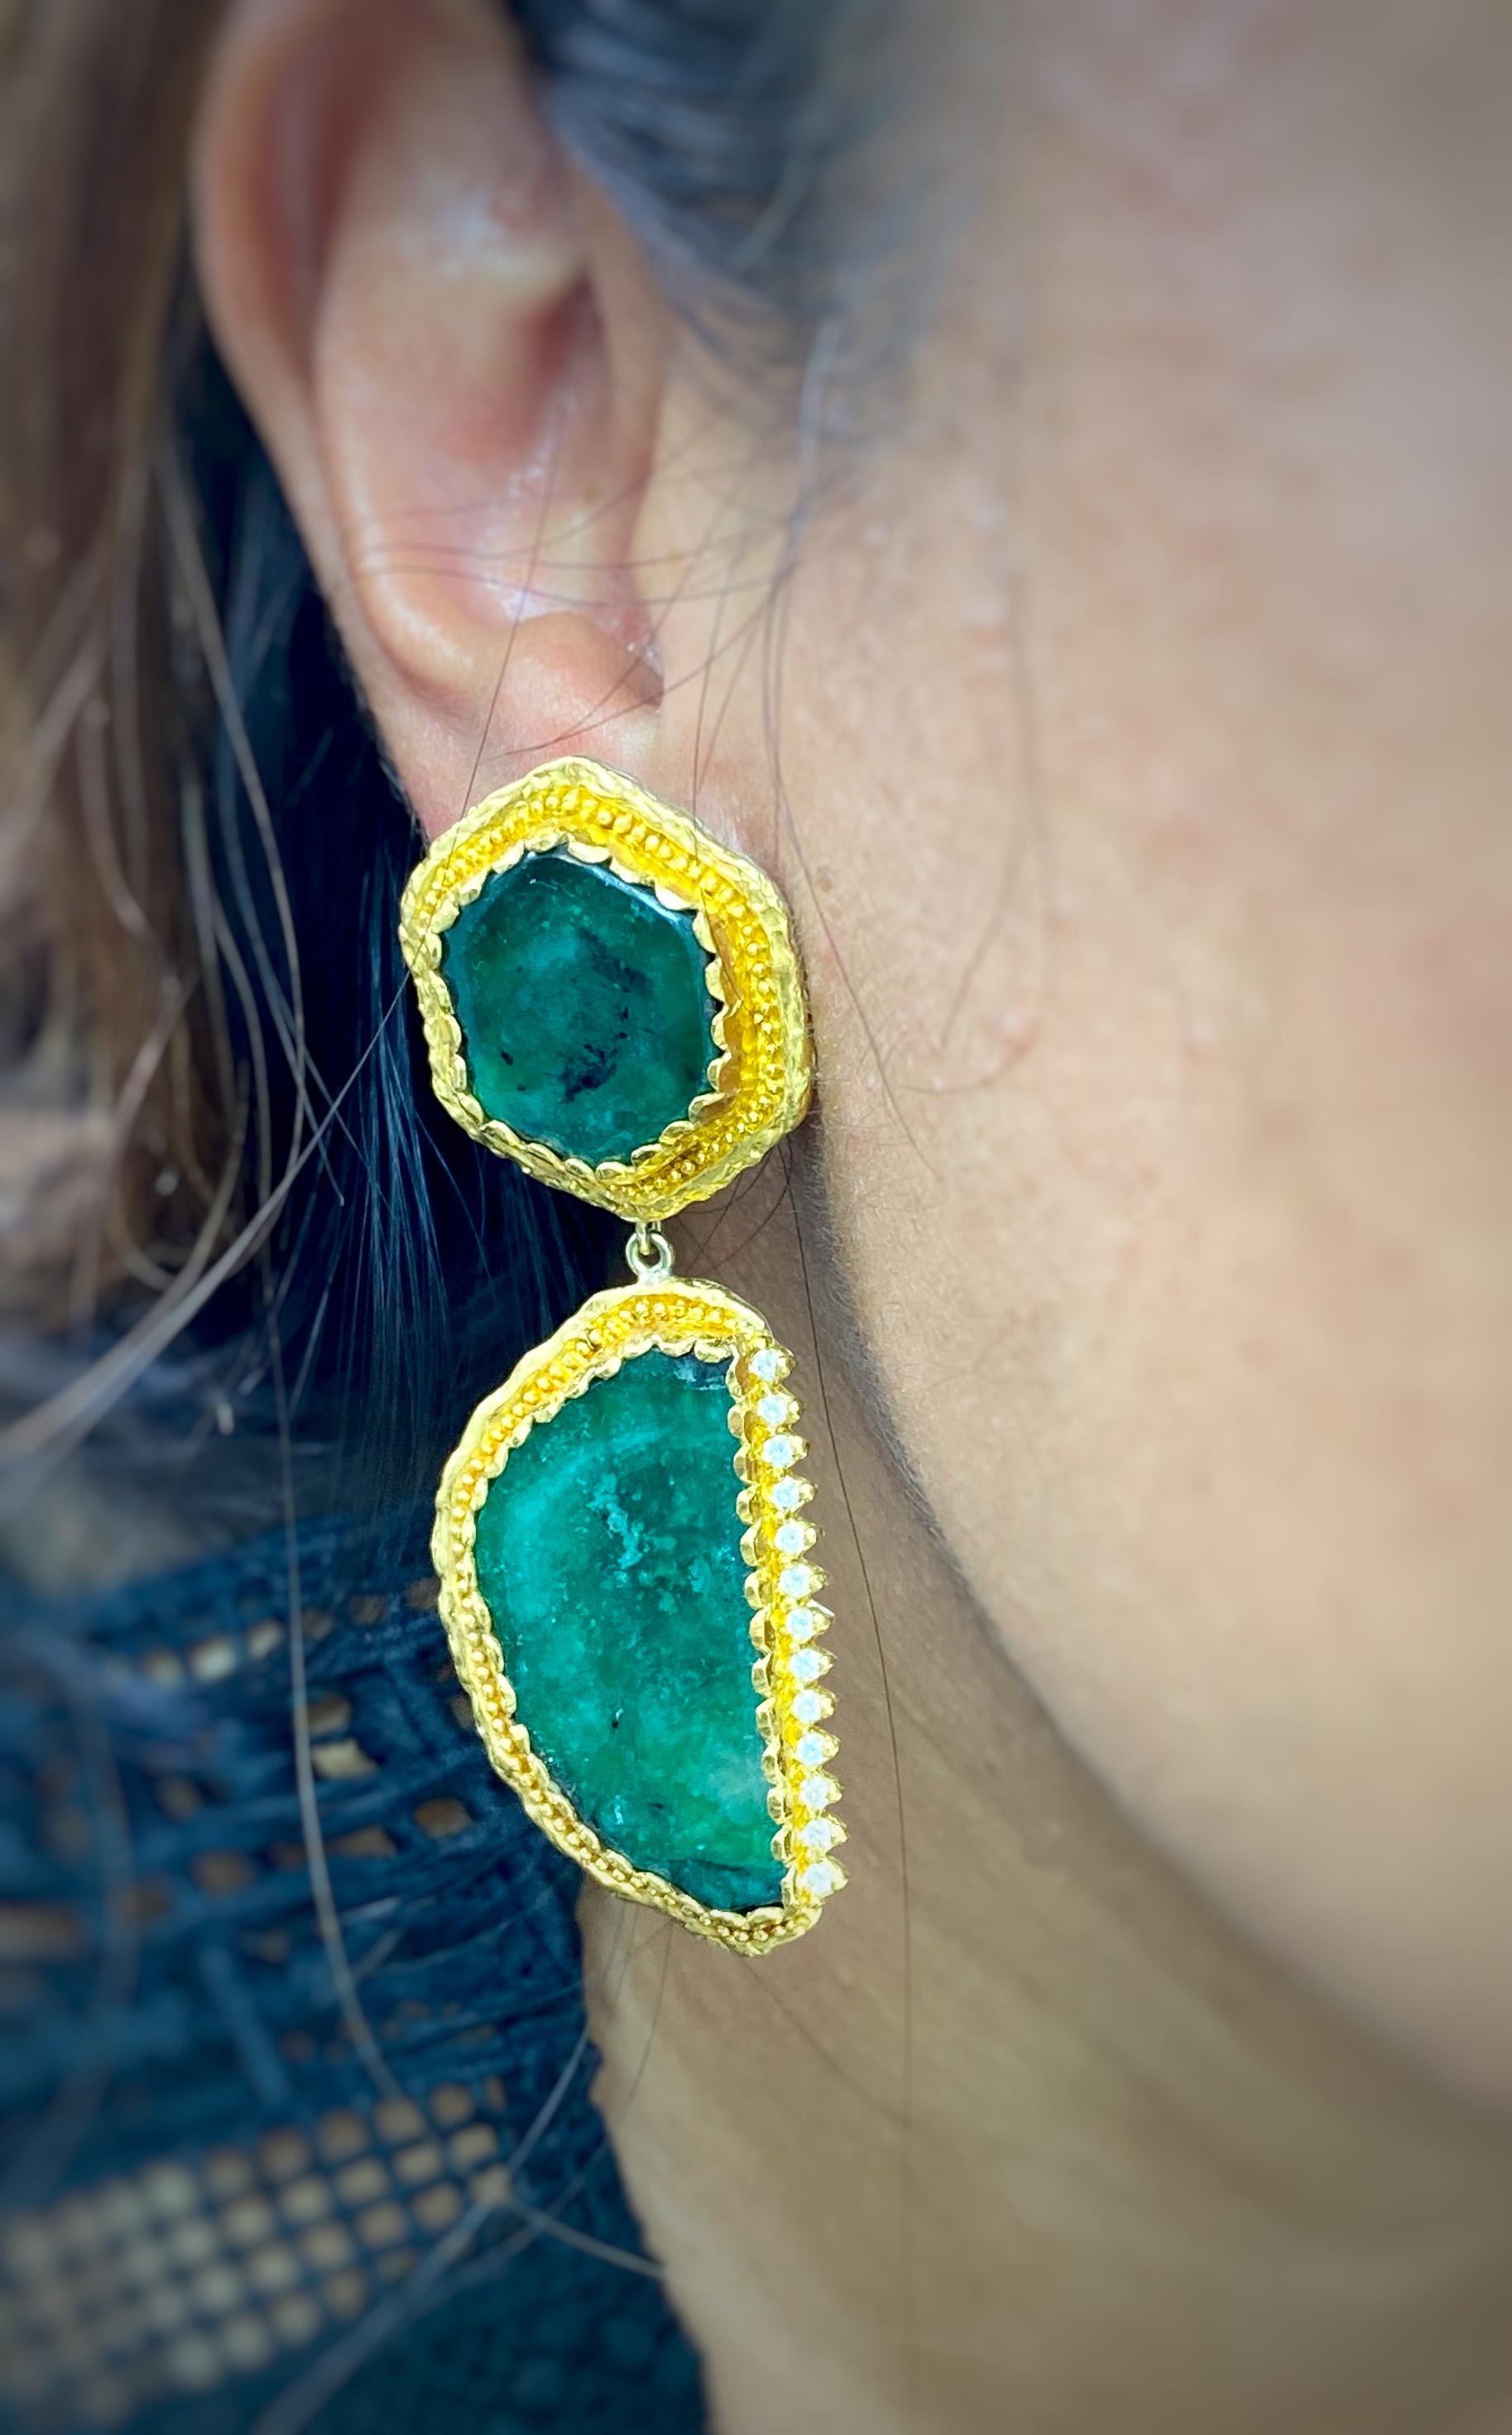 These Earrings were designed and made by well known designer Victor Velyan.   They contain 4 Emerald slices weighing 55.68 carats accented by 0.50 carats in fully faceted Diamond pave.  They are made of a base of pure Silver with all accent work